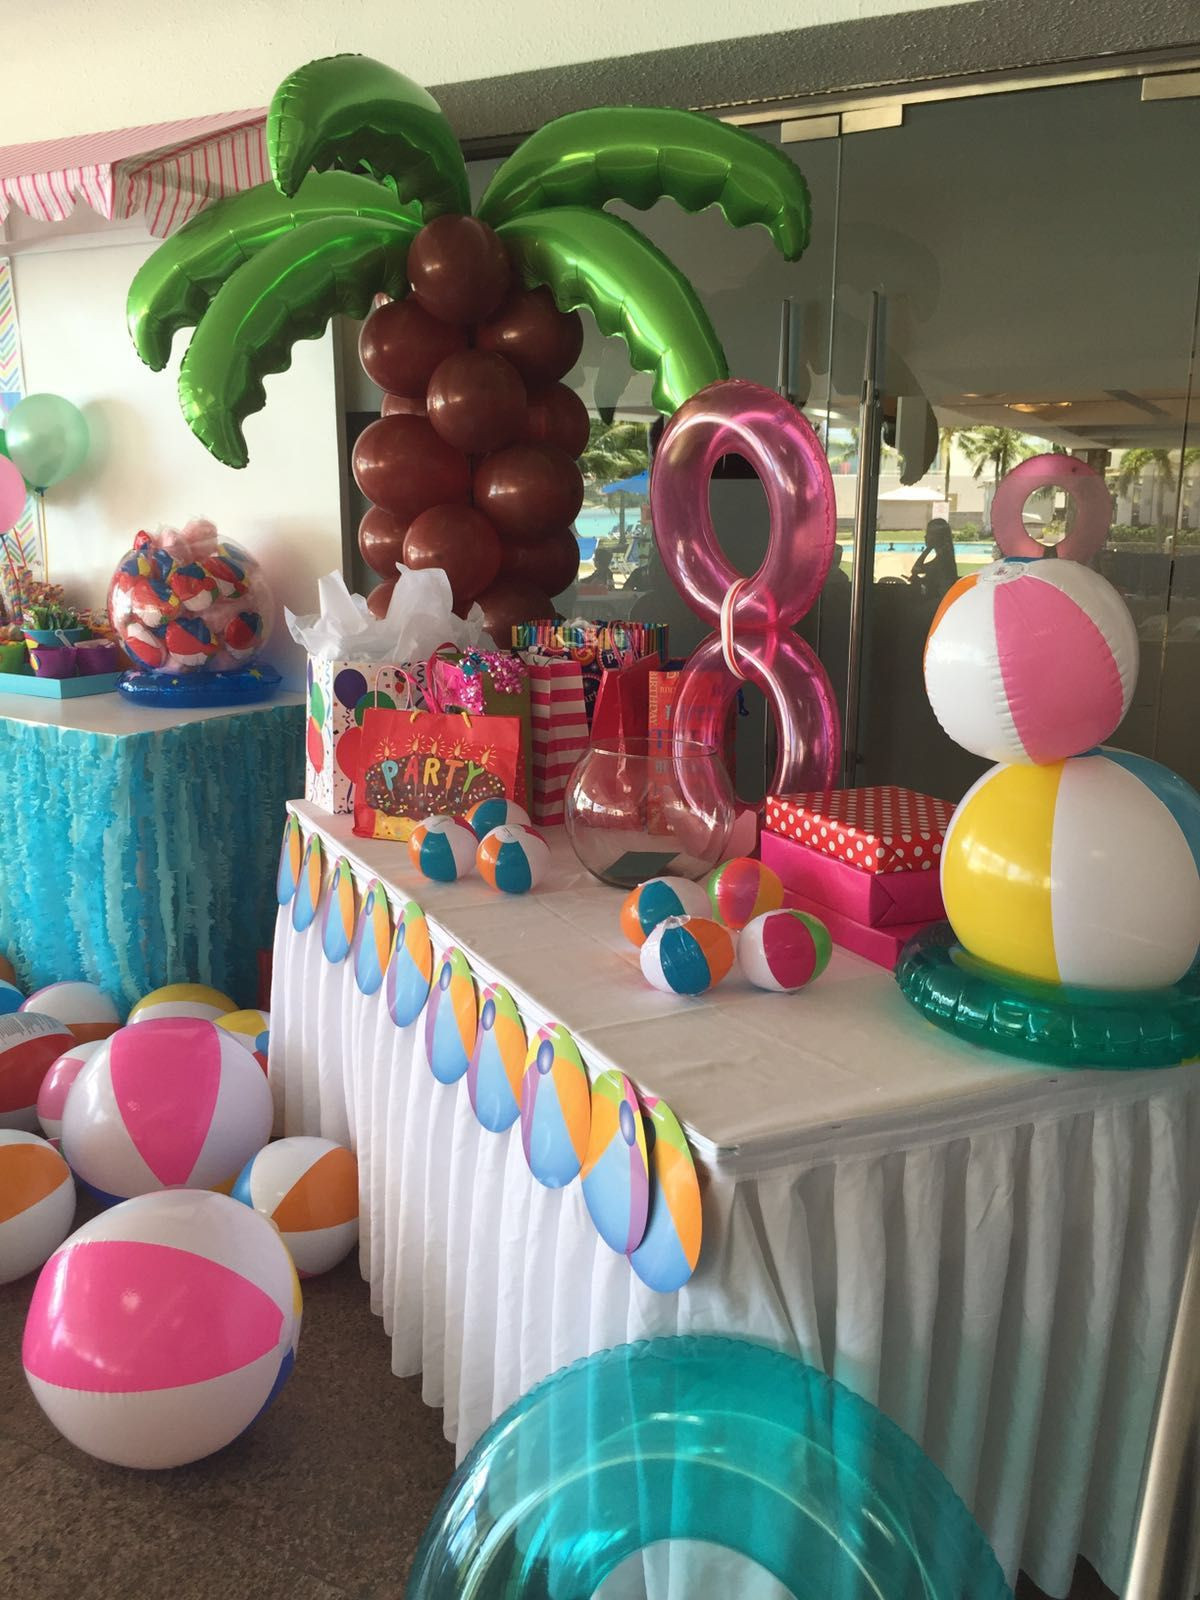 Pool Party Ideas For 8 Year Olds
 Balloon coconut tree added to enhance the pool party theme